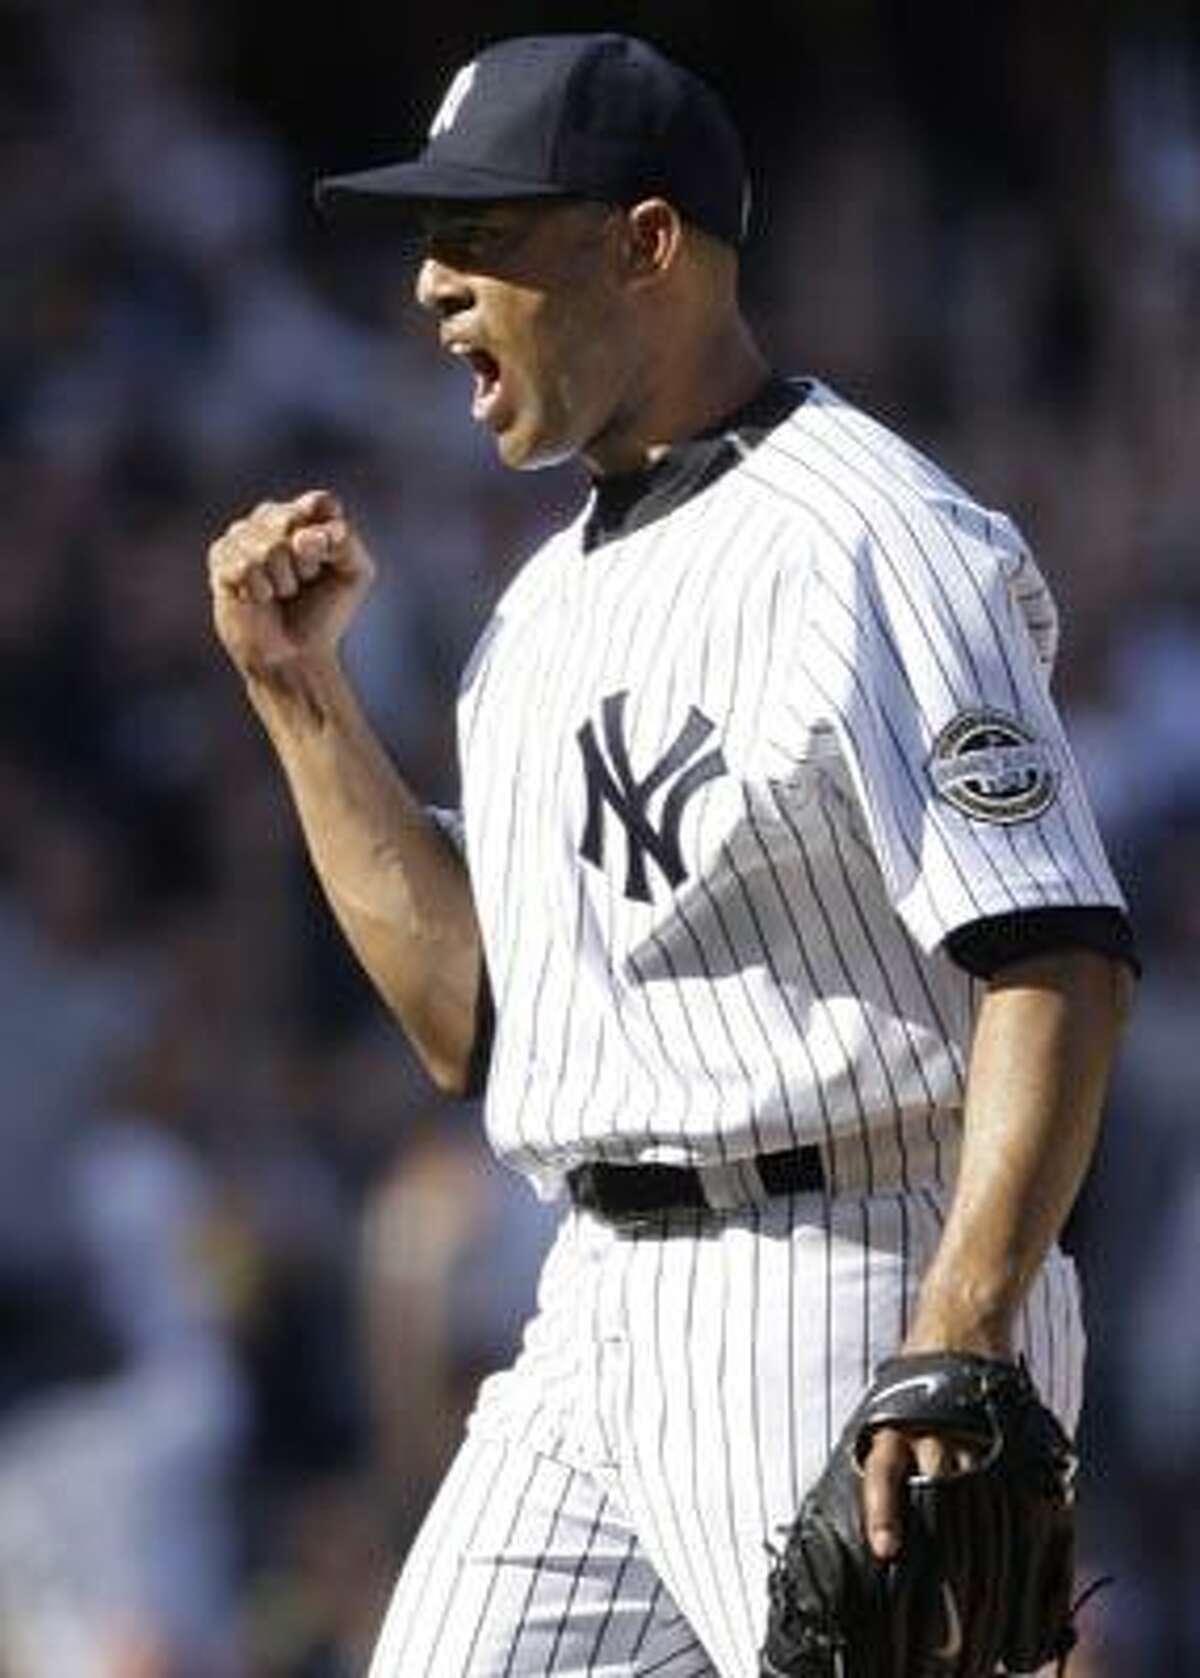 FILE - In this April 17, 2009, file phot, New York Yankees pitcher Mariano Rivera reacts after striking out Cleveland Indians' Mark DeRosa to end the game in a Major League Baseball game in New York. Rivera and the Yankees have finalized their $30 million, two-year contract on Tuesday, Dec. 14, 2010. The 41-year-old closer receives $15 million in each of the next two seasons, with $1.5 million each year deferred with no interest. The deferred money will be paid in $1 million annual installments starting in 2013. (AP Photo/Julie Jacobson, File)